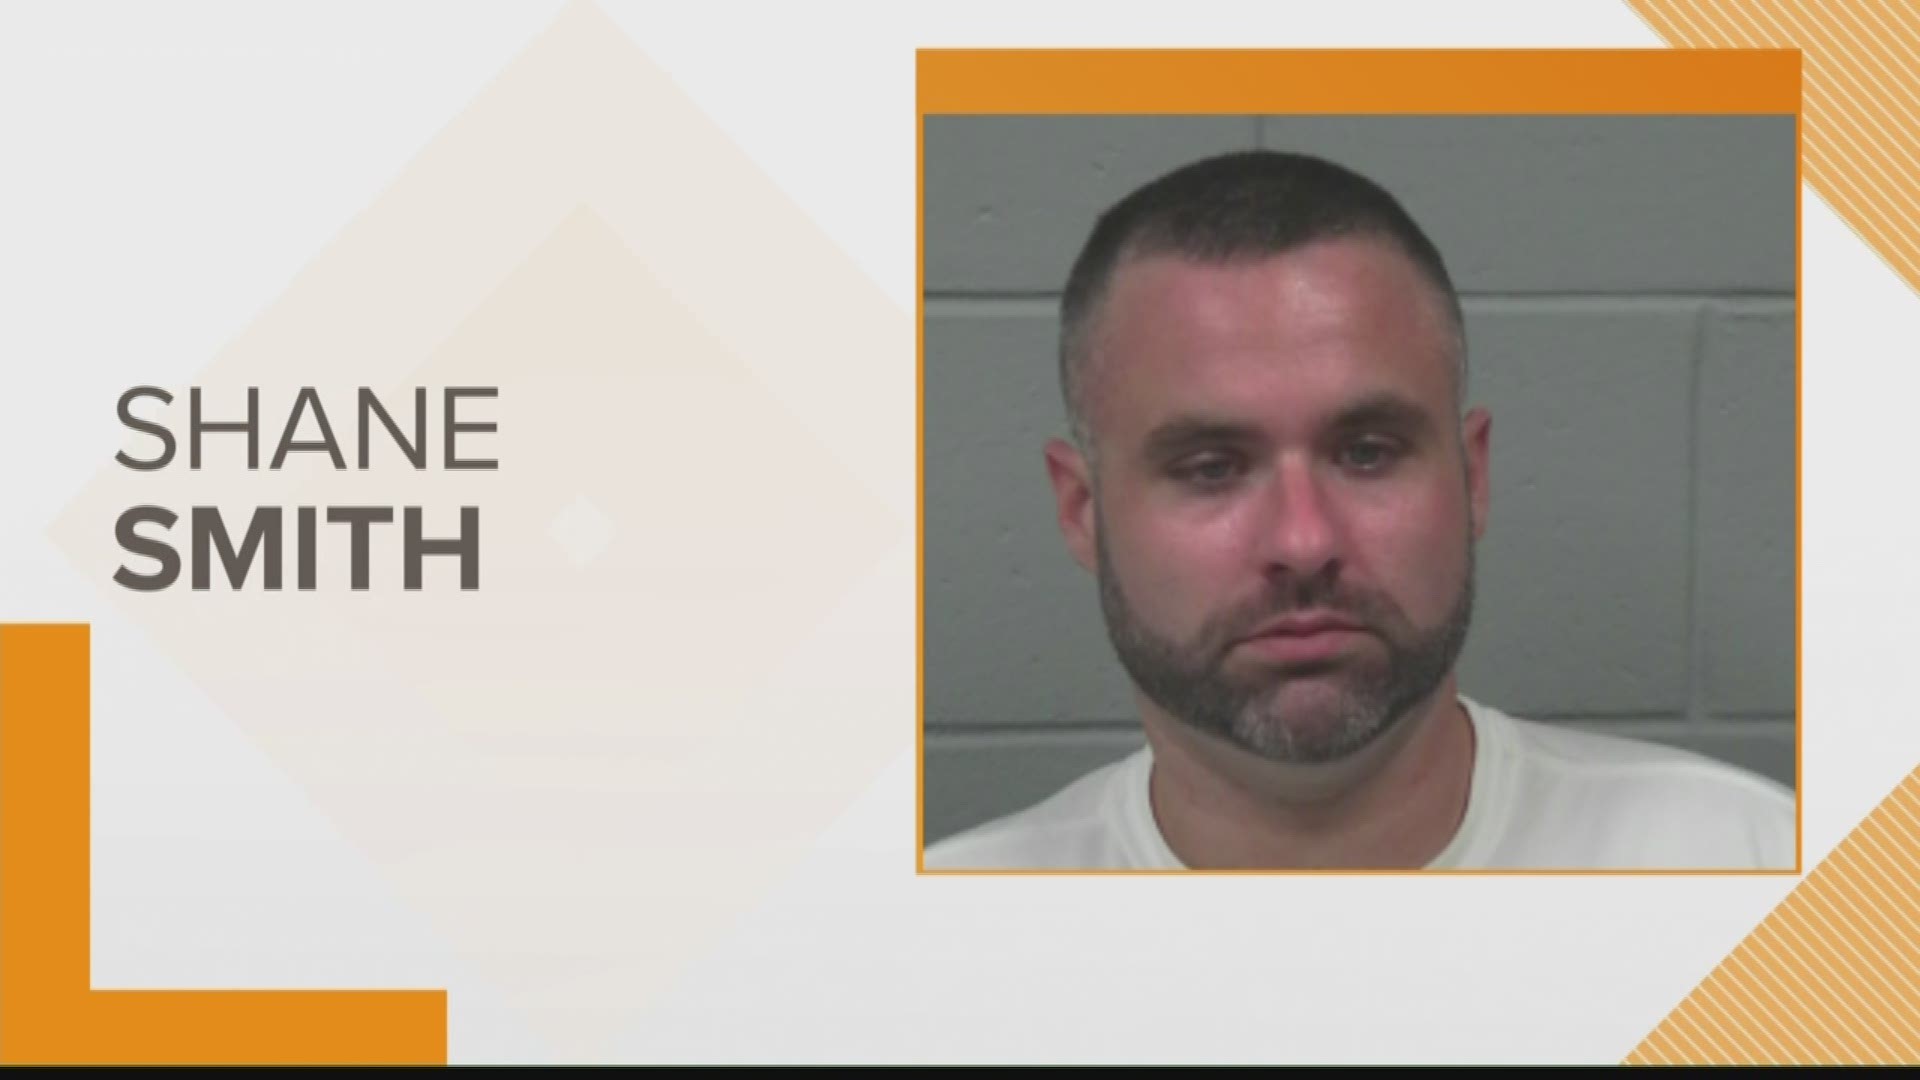 Police are searching for Shane Smith, the father of a Bangor 1-year-old who died in 2018 of a fentanyl overdose. There is a warrant out for his arrest.